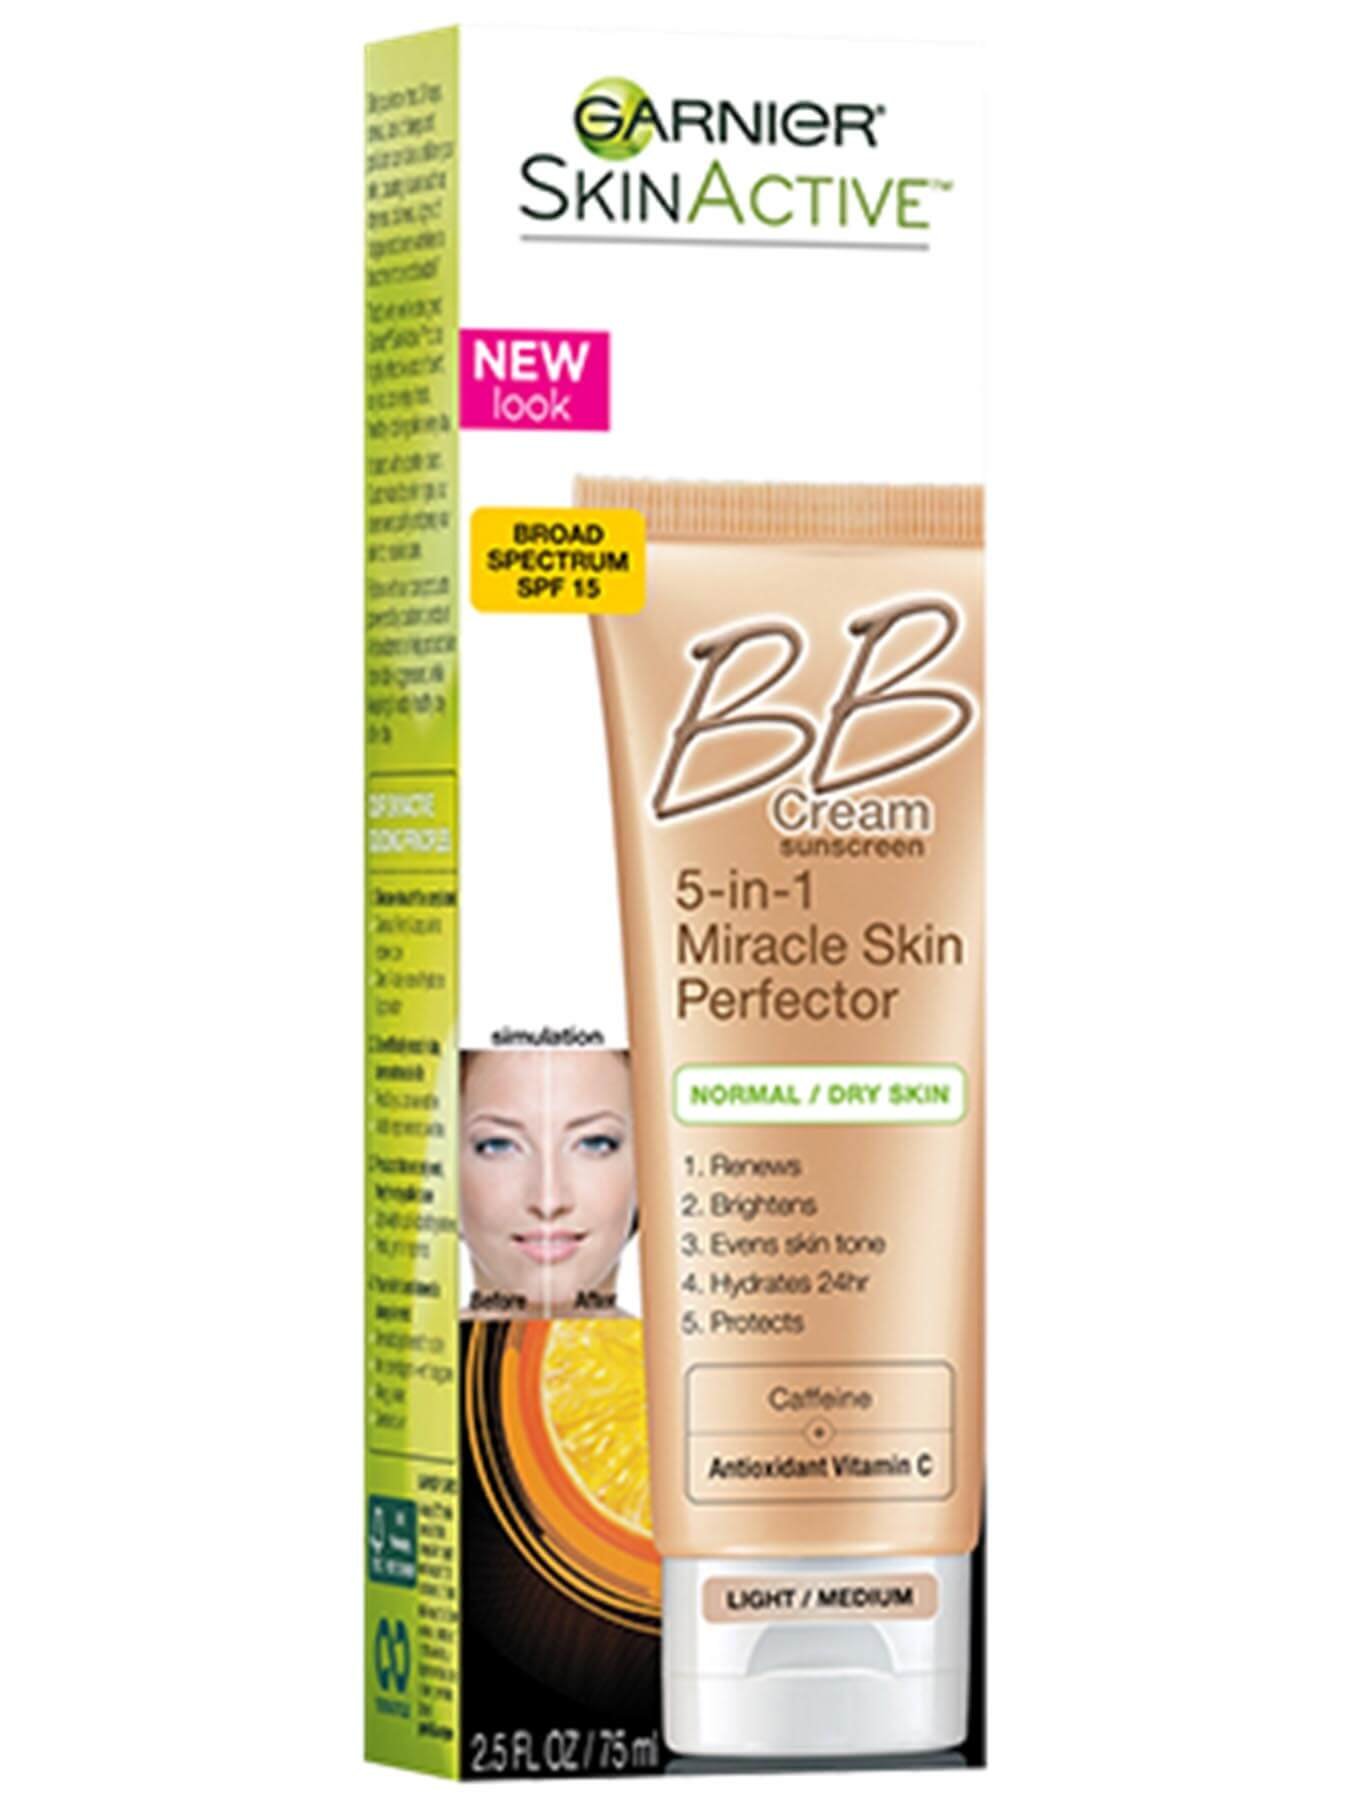 Front view of 5-in-1 Miracle Skin Perfector BB Cream - Light/Medium box.